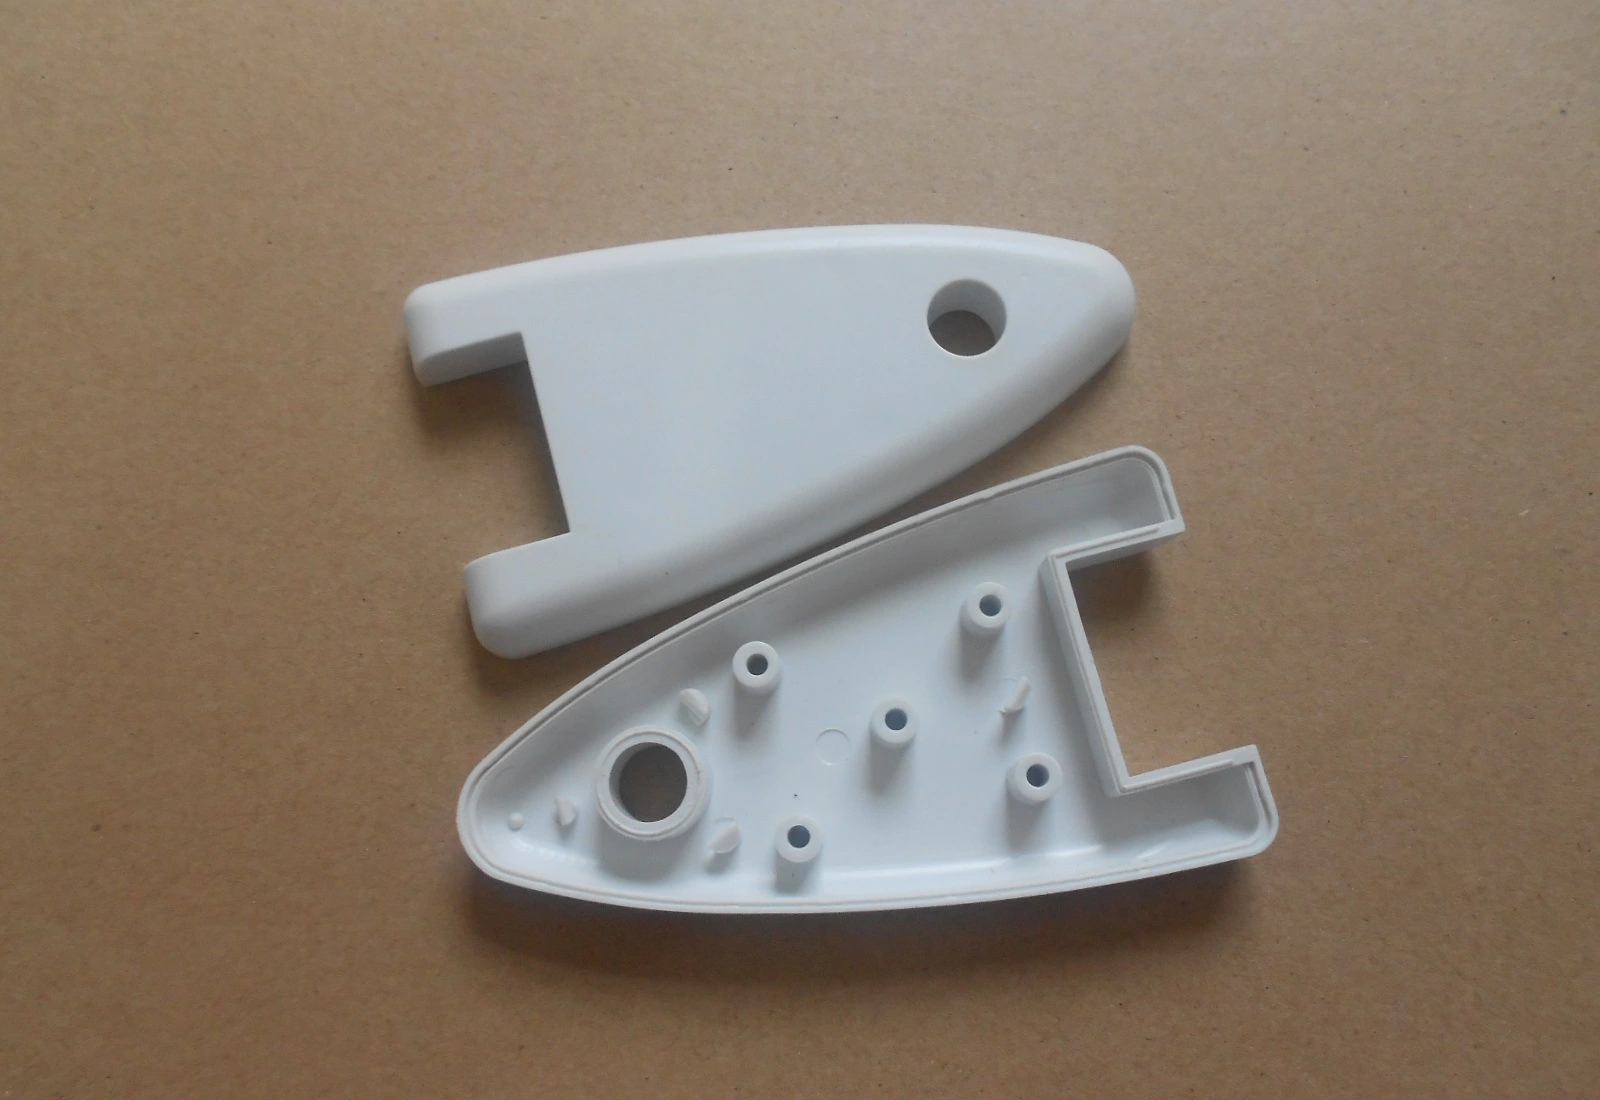 Plastic Mold Products